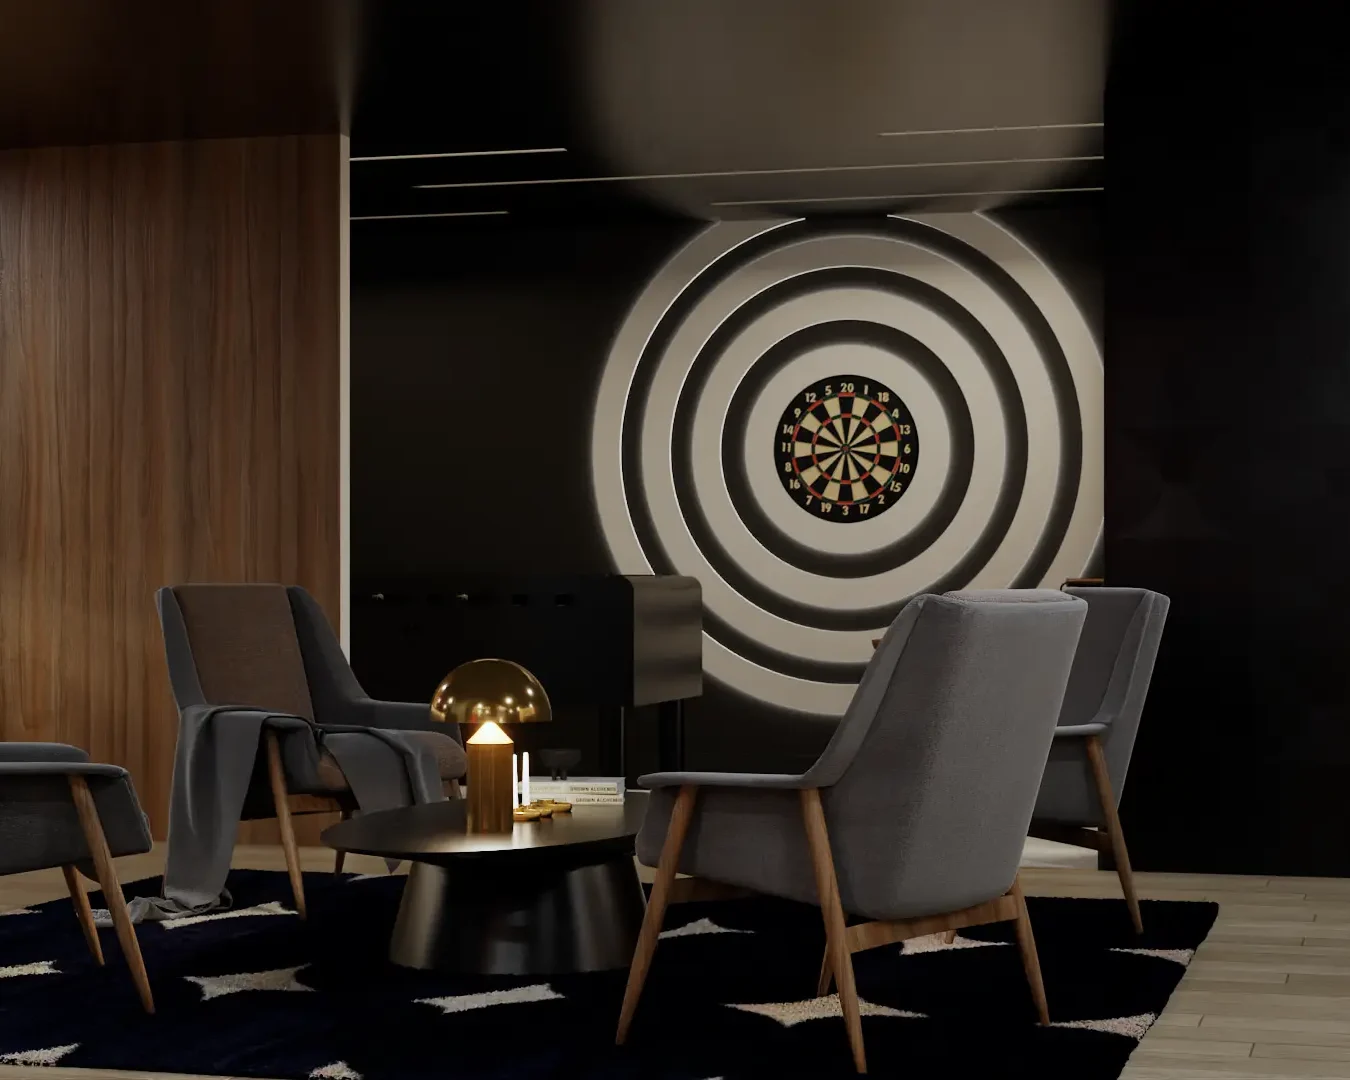 A contemporary game room with a large dartboard set against a bold circular design, modern gray chairs, a black and white rug, and ambient lighting. The stylish decor makes it a fun and inviting space. Design by Debora, an online interior design service.